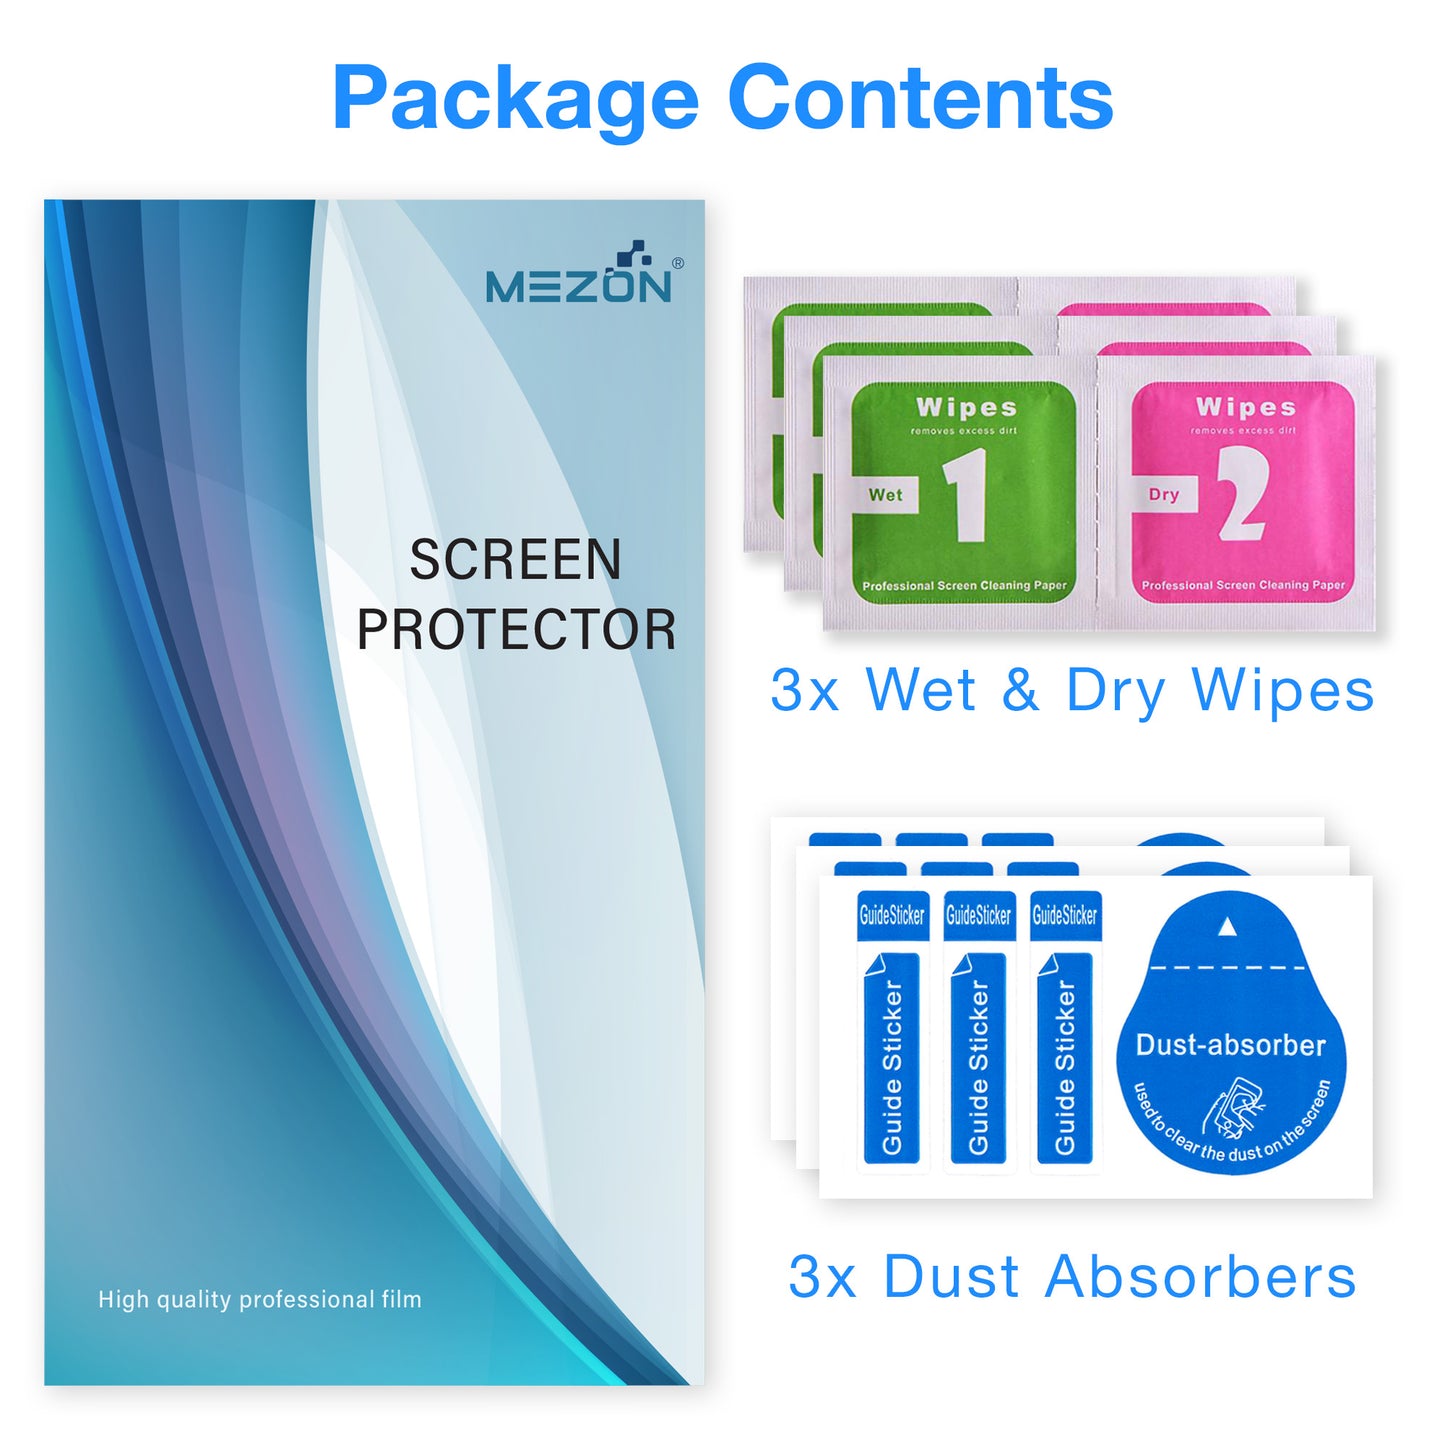 [3 Pack] MEZON Nokia G50 Ultra Clear Screen Protector Case Friendly Film (Nokia G50, Clear)